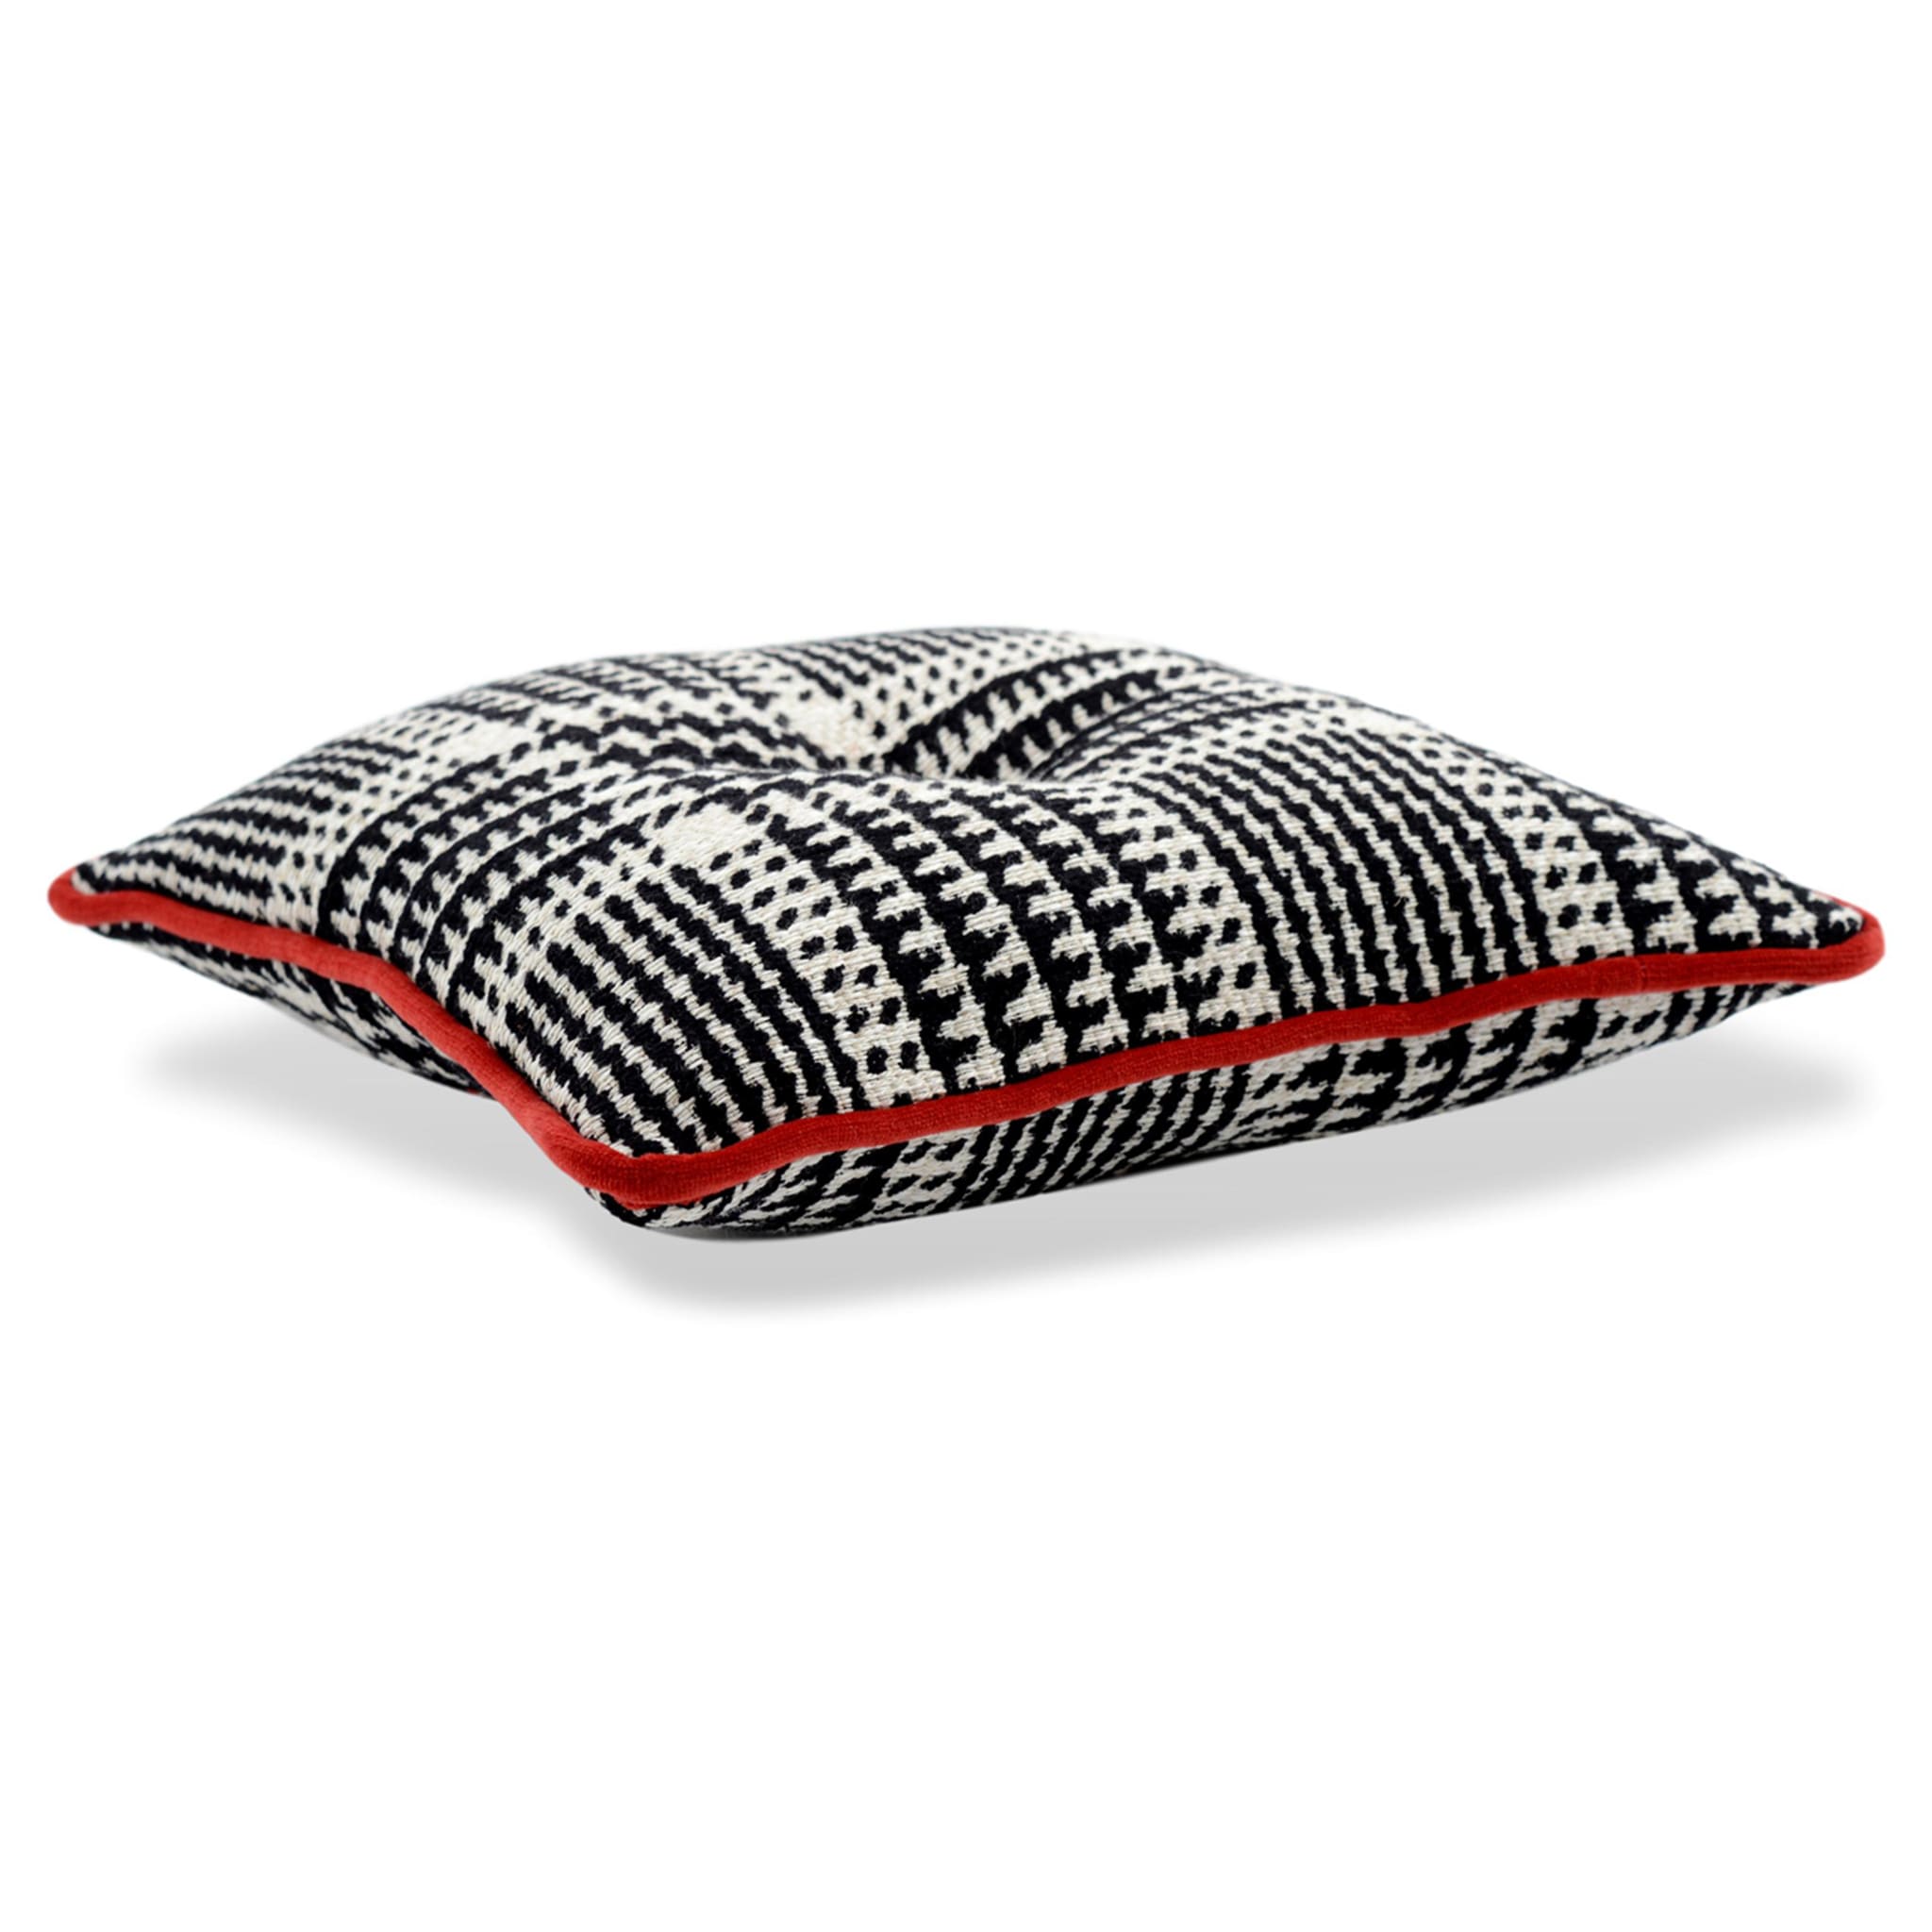 Carré Cushion in Galles' Prince jacquard fabric - Alternative view 1